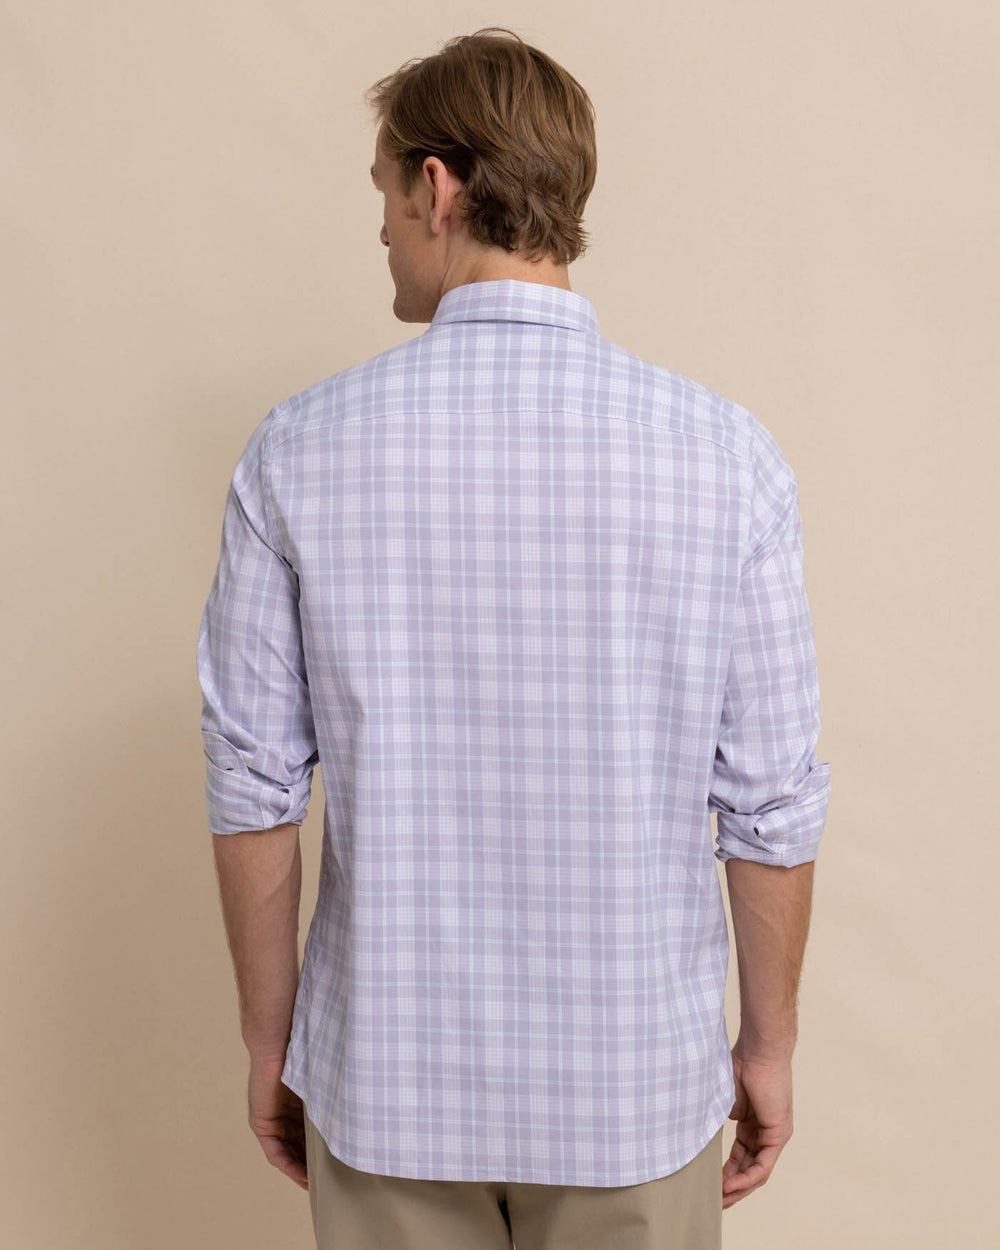 The back view of the Southern Tide Intercoastal Primrose Plaid Long Sleeve Sport Shirt by Southern Tide - Orchid Petal